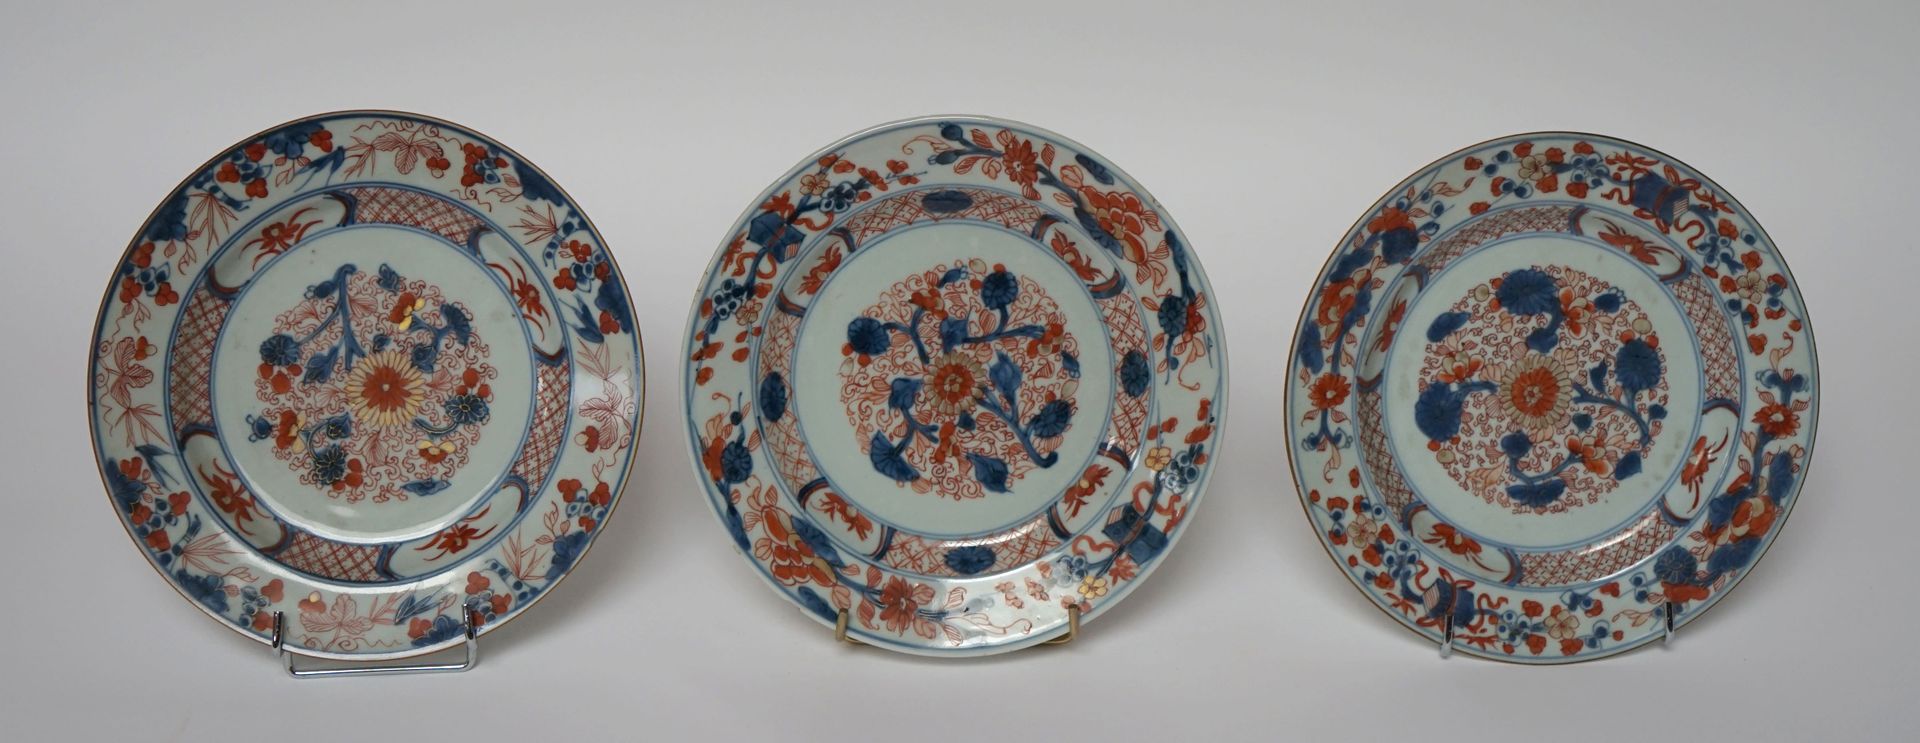 Null CHINA, 18th-19th century. Three Imari porcelain plates in the Japanese styl&hellip;